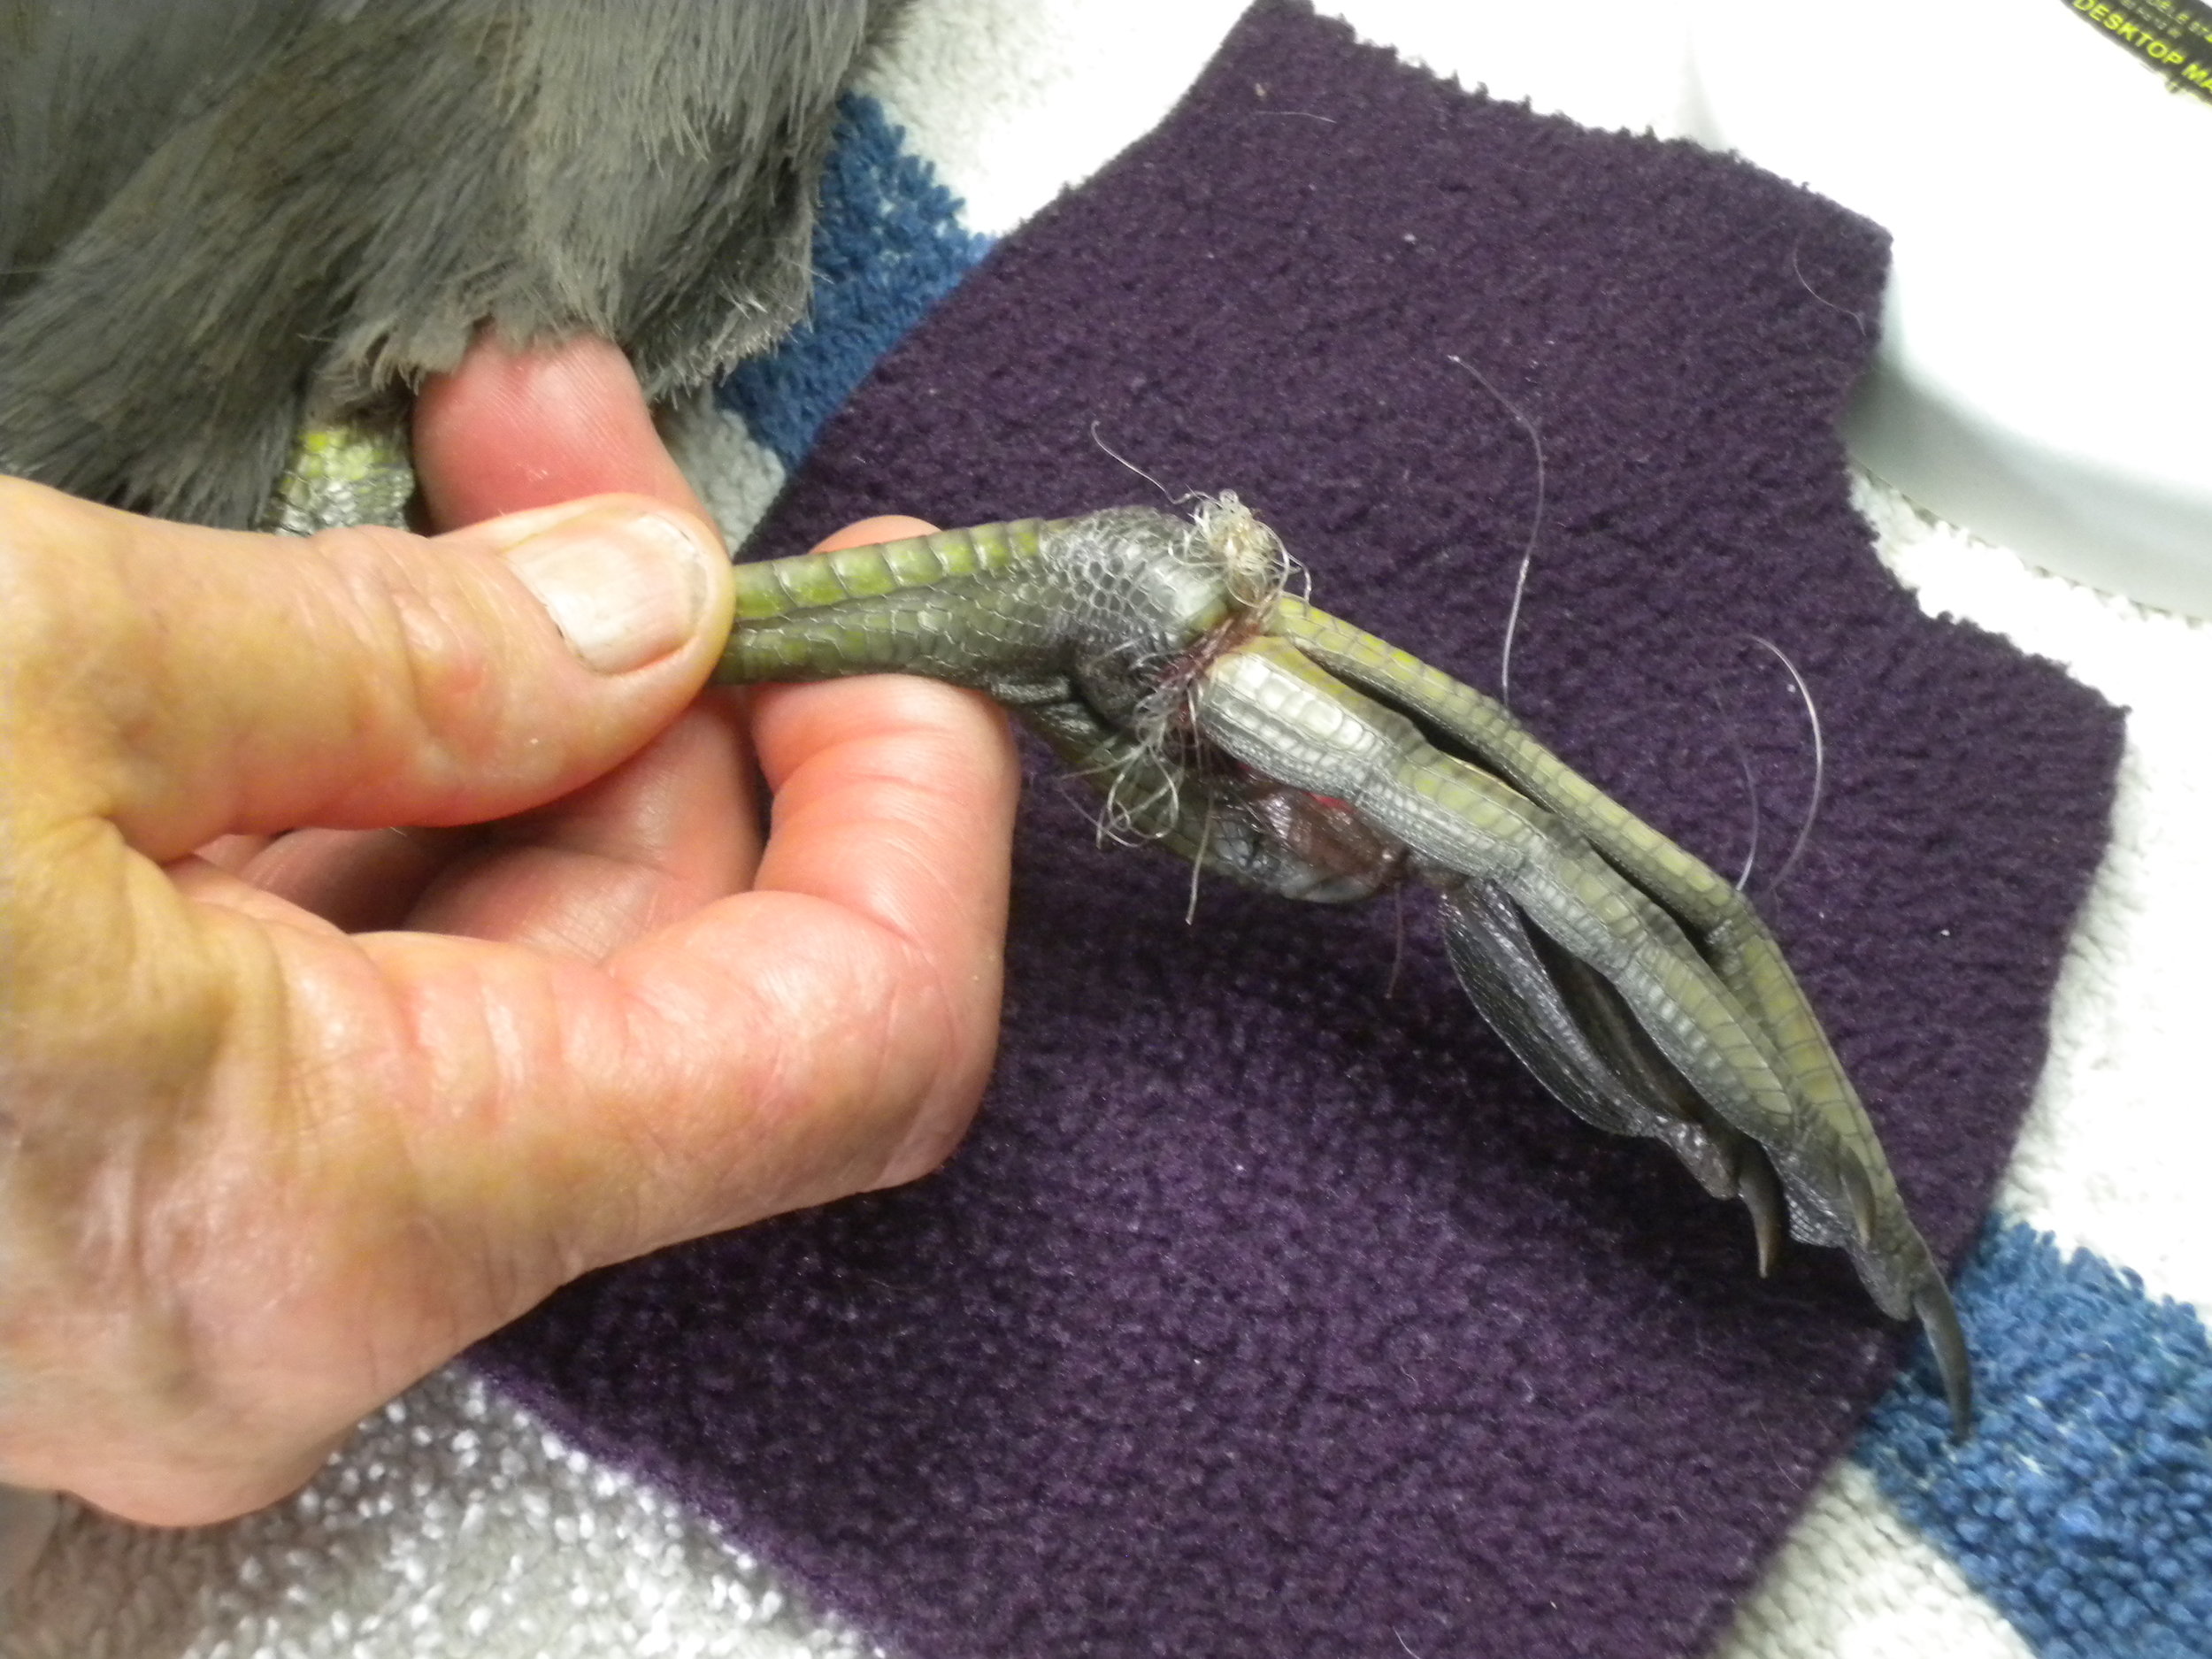  A California Gull was rescued wrapped in fishing line. The blackened foot has died because the blood flow was cut off. 